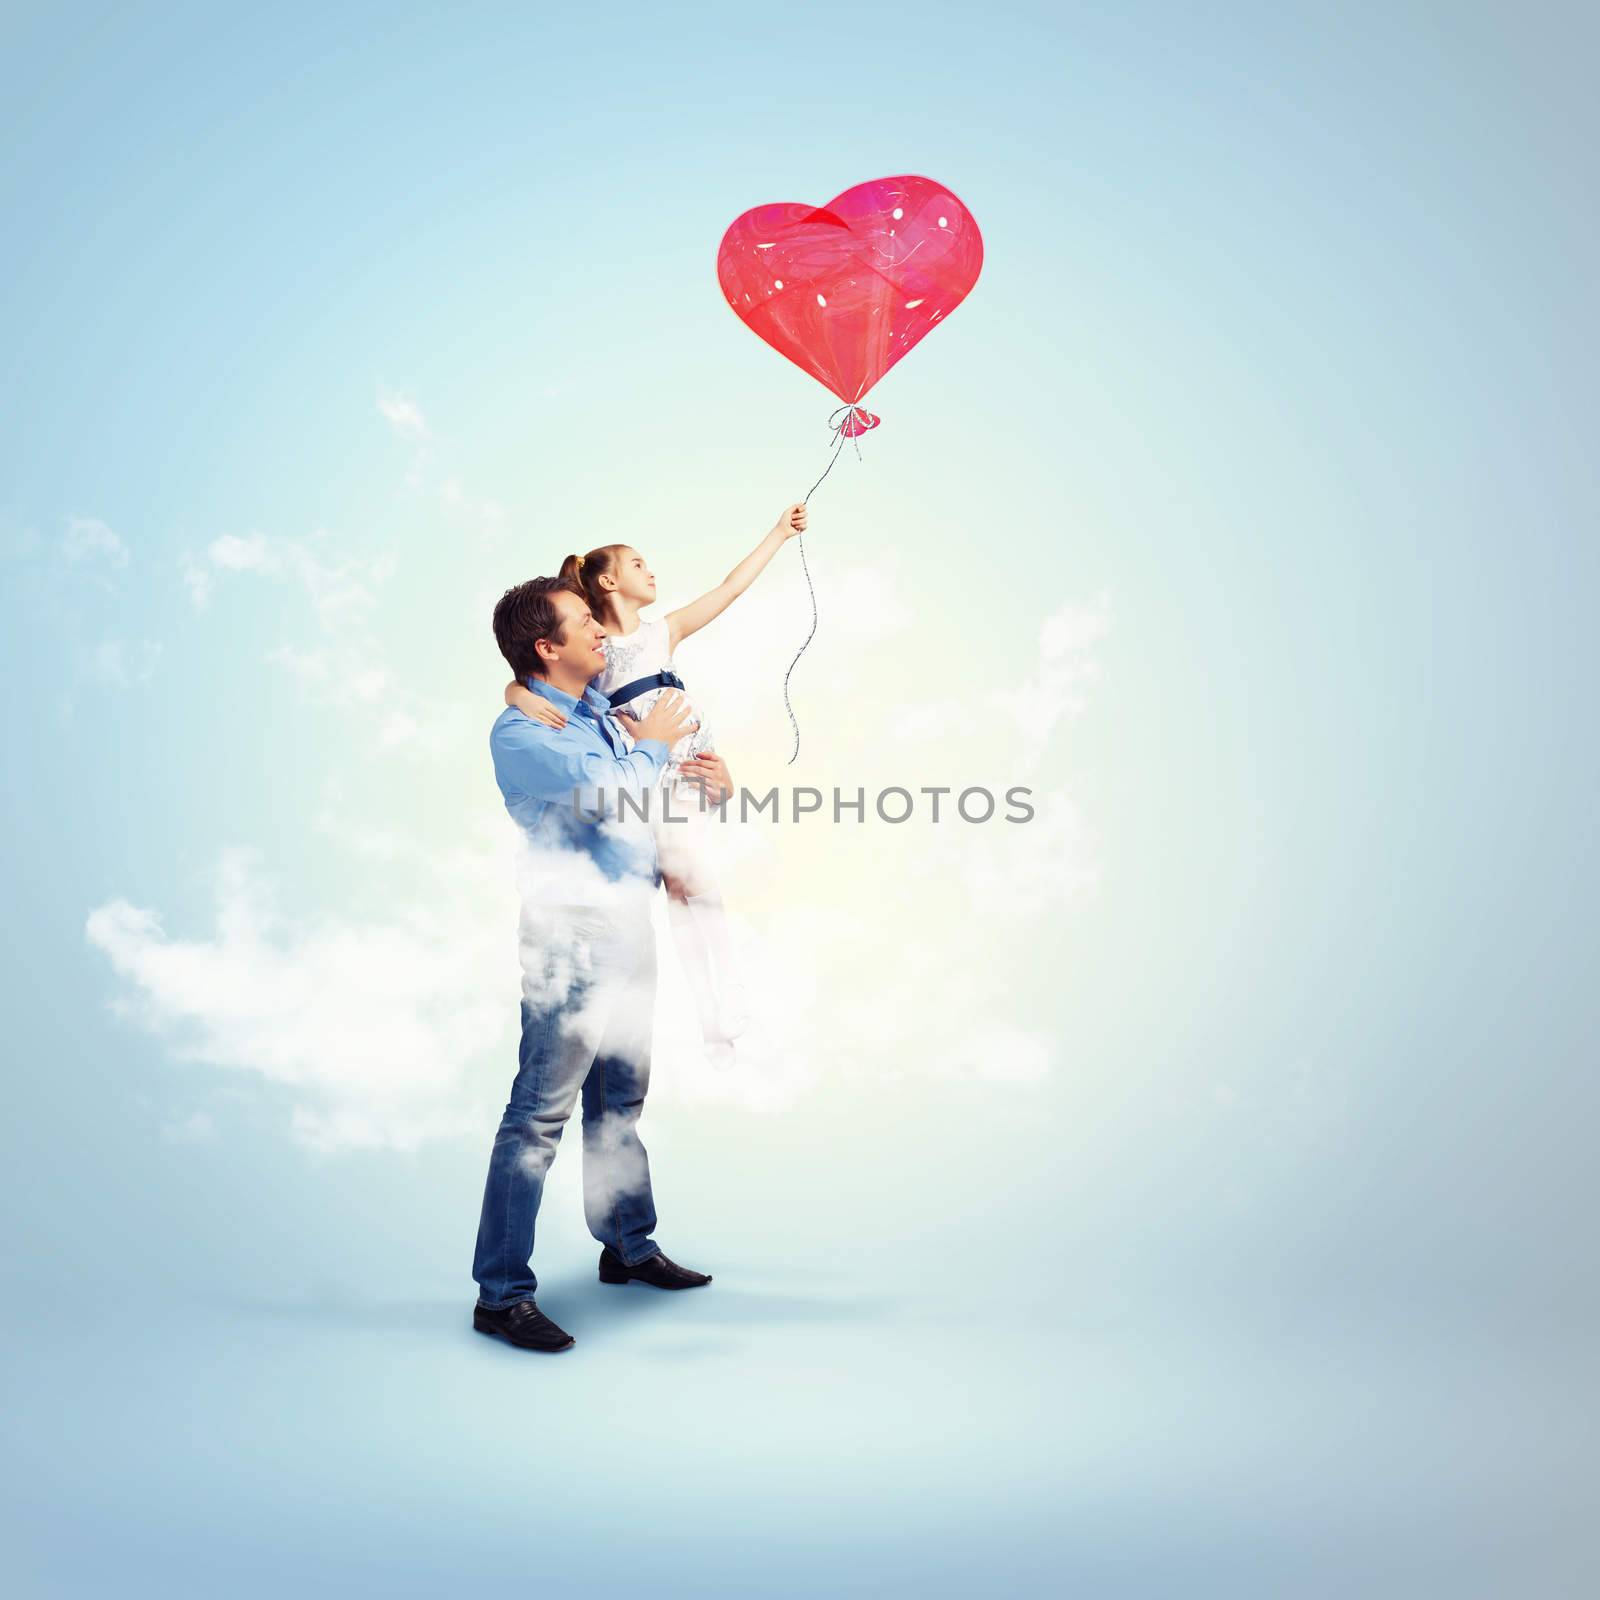 Image of happy father holding his daughter and a red heart baloon